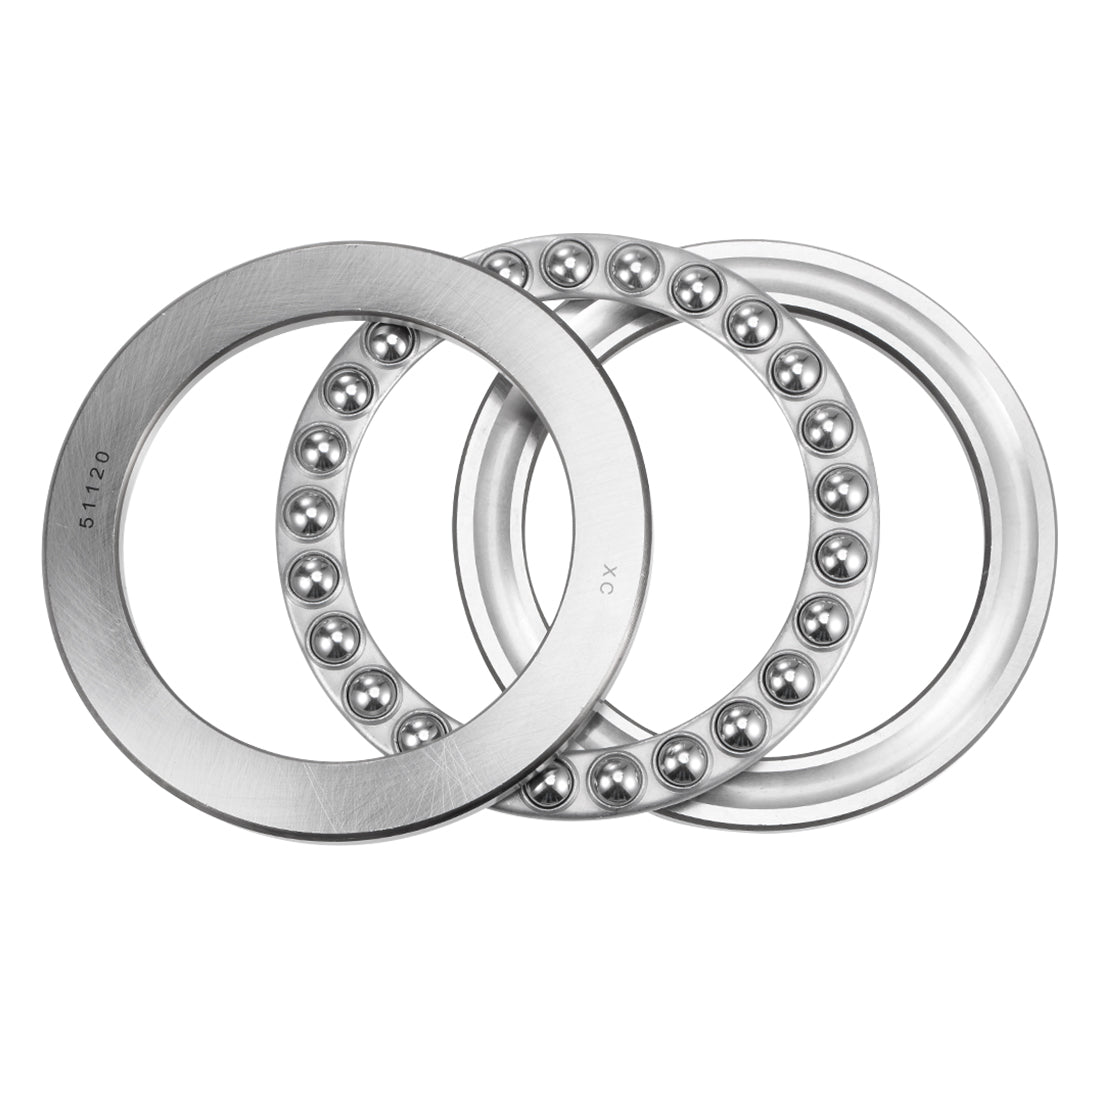 uxcell Uxcell 51120 Miniature Thrust Ball Bearing 100x135x25mm Chrome Steel with Washer